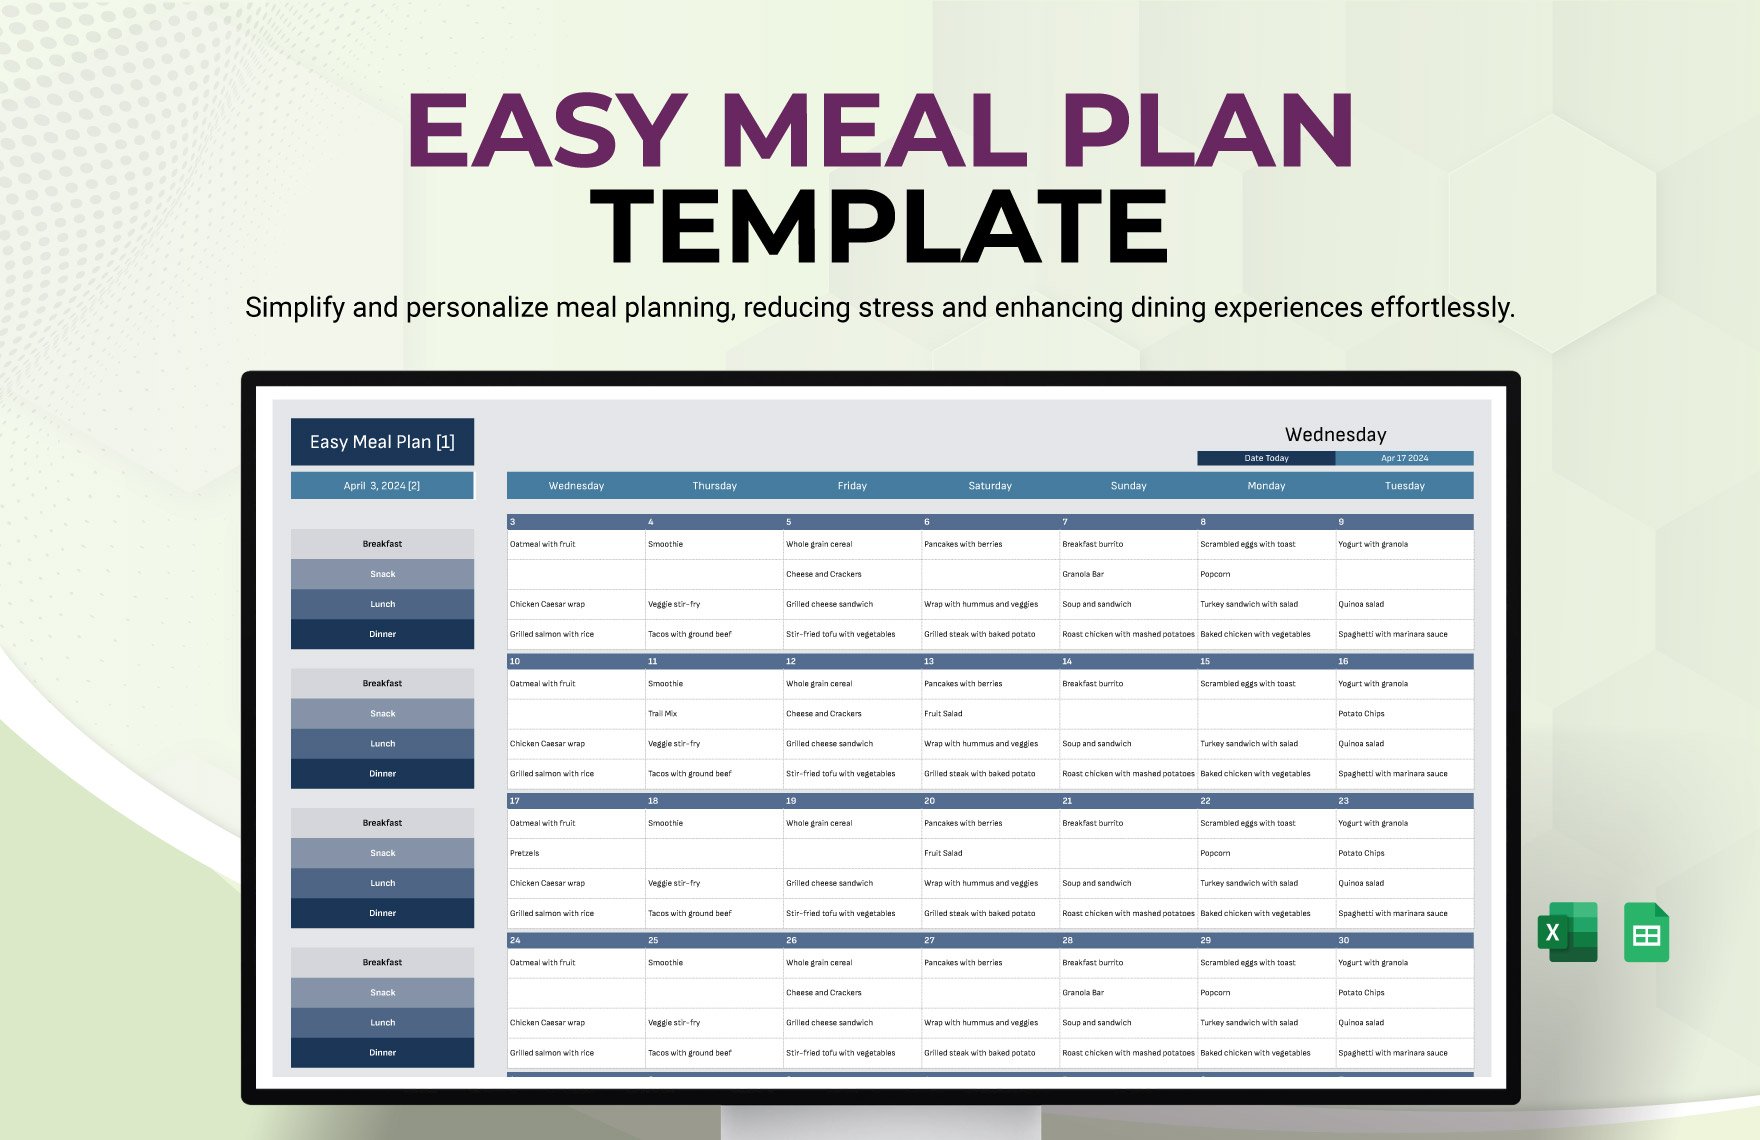 Easy Meal Plan Template in Excel, Google Sheets